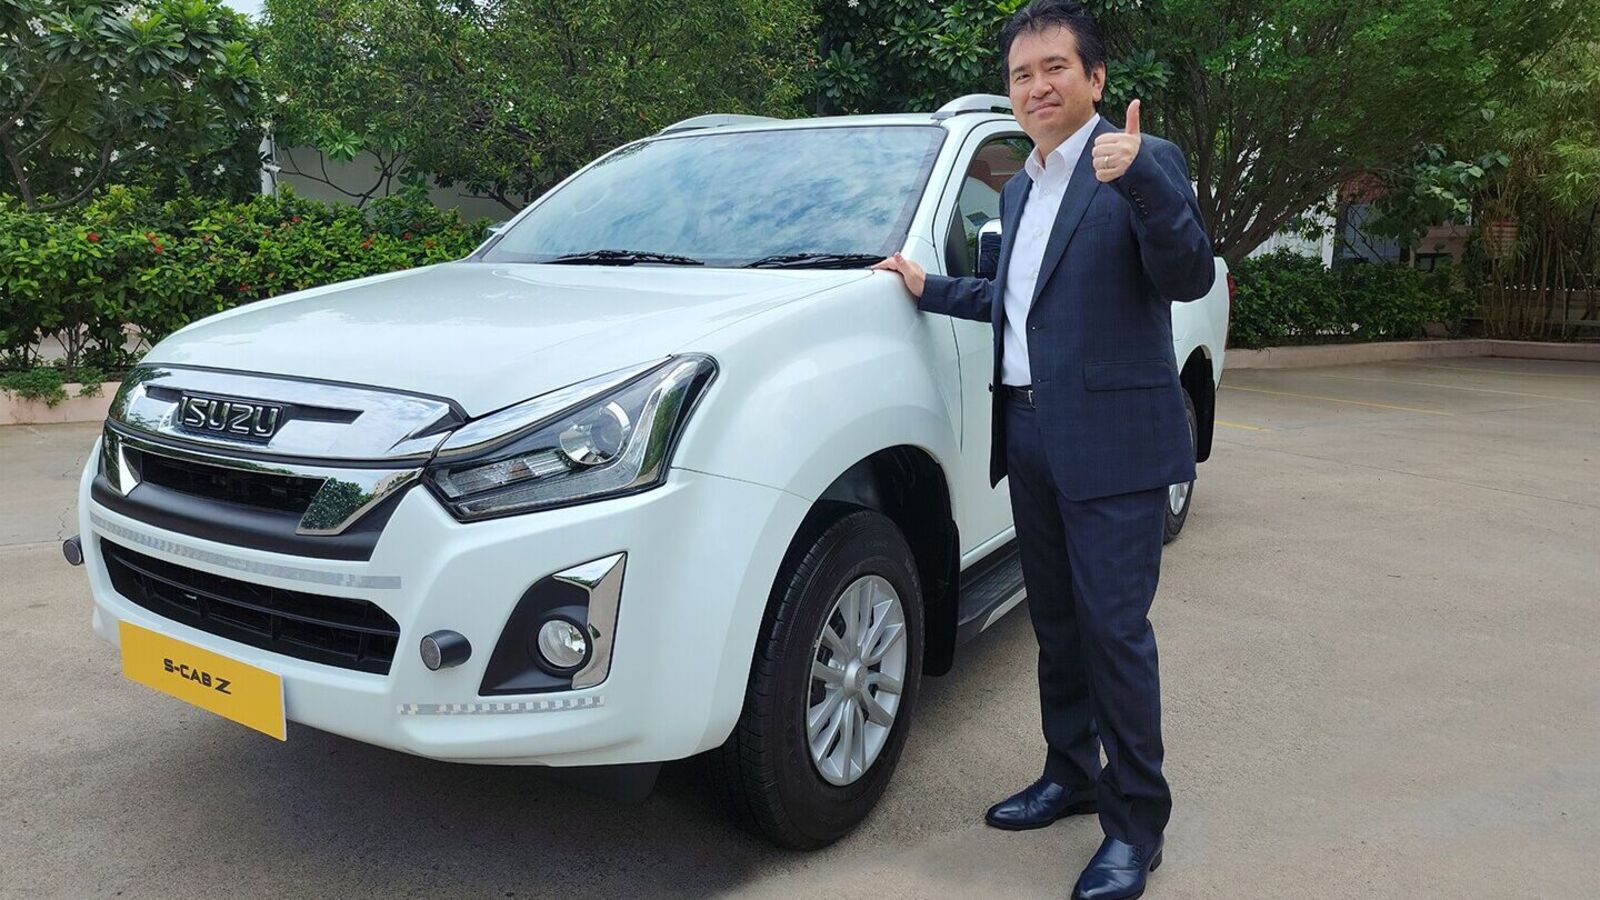 2023 Isuzu V Cross, MUX, D Max Updated - New Colours, Features